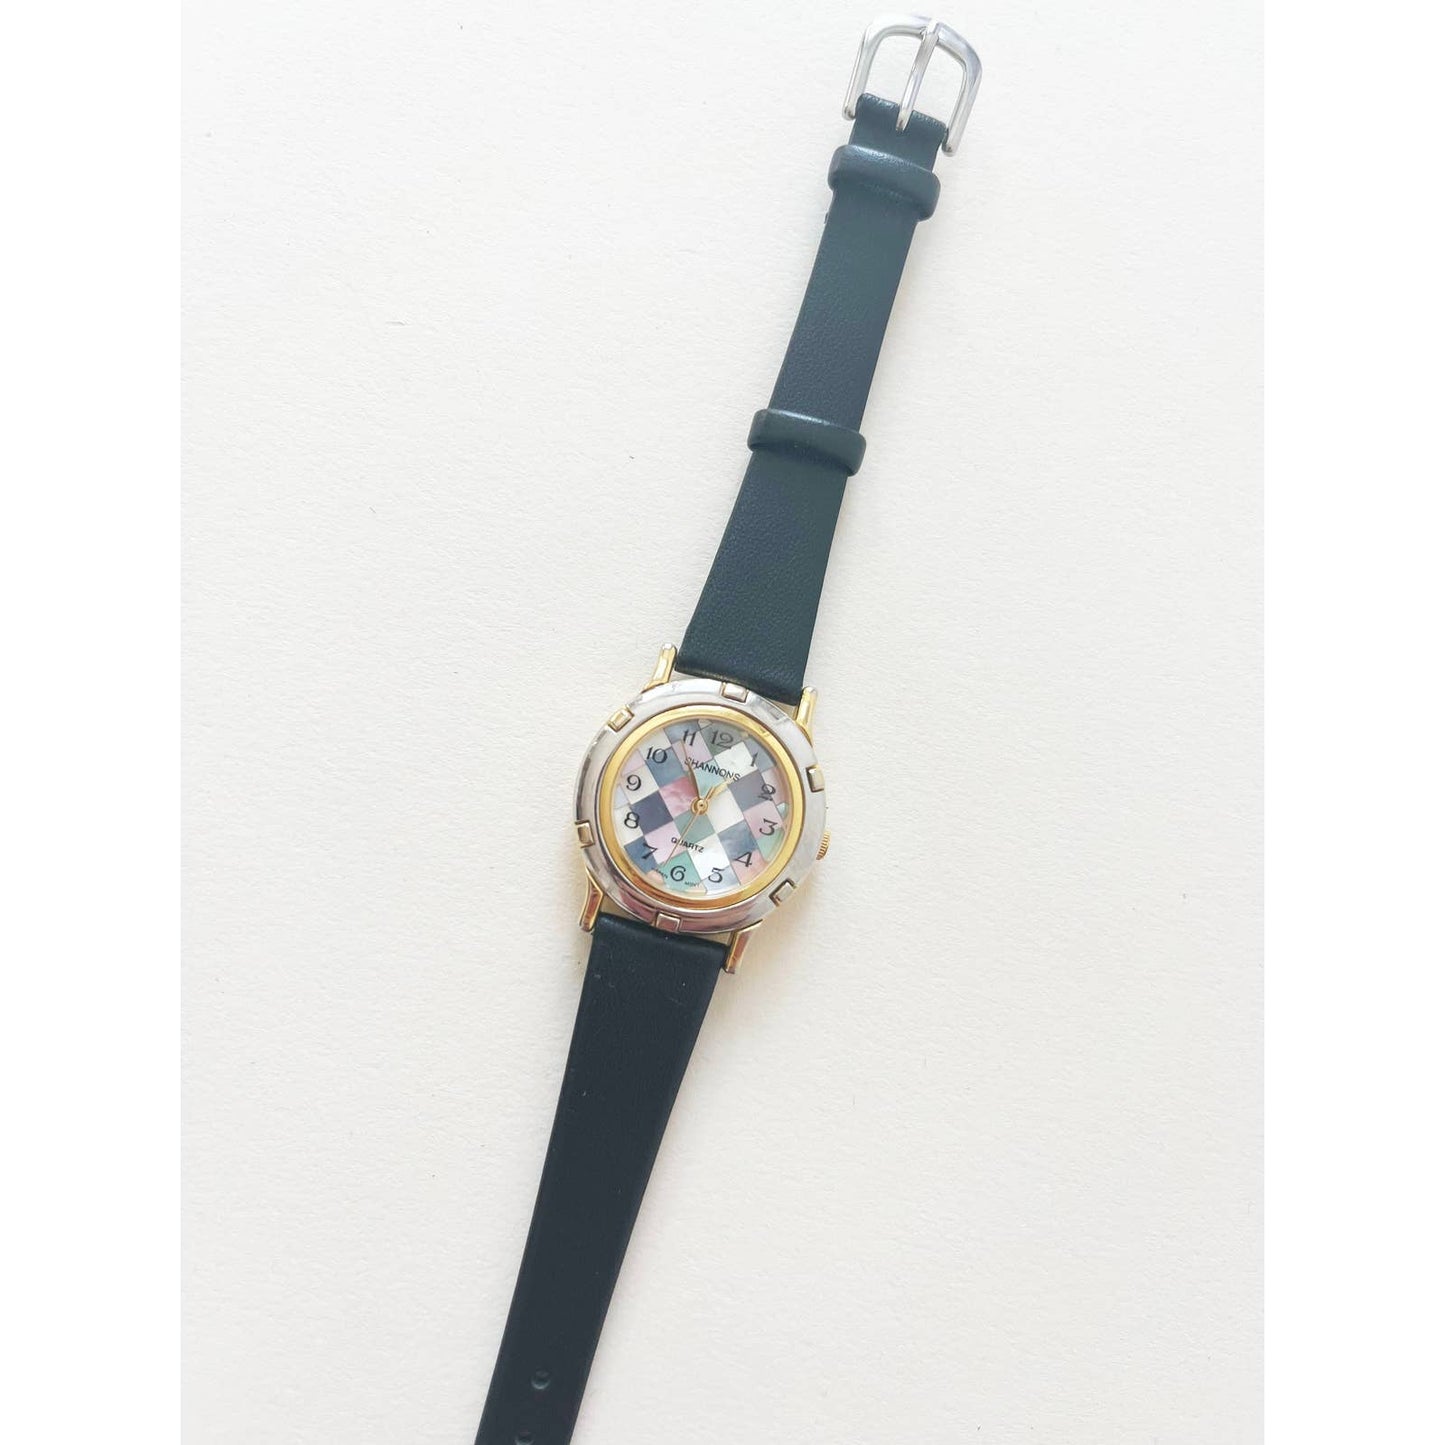 Vintage Colorful Checkered Leather Watch with Gold and Silver